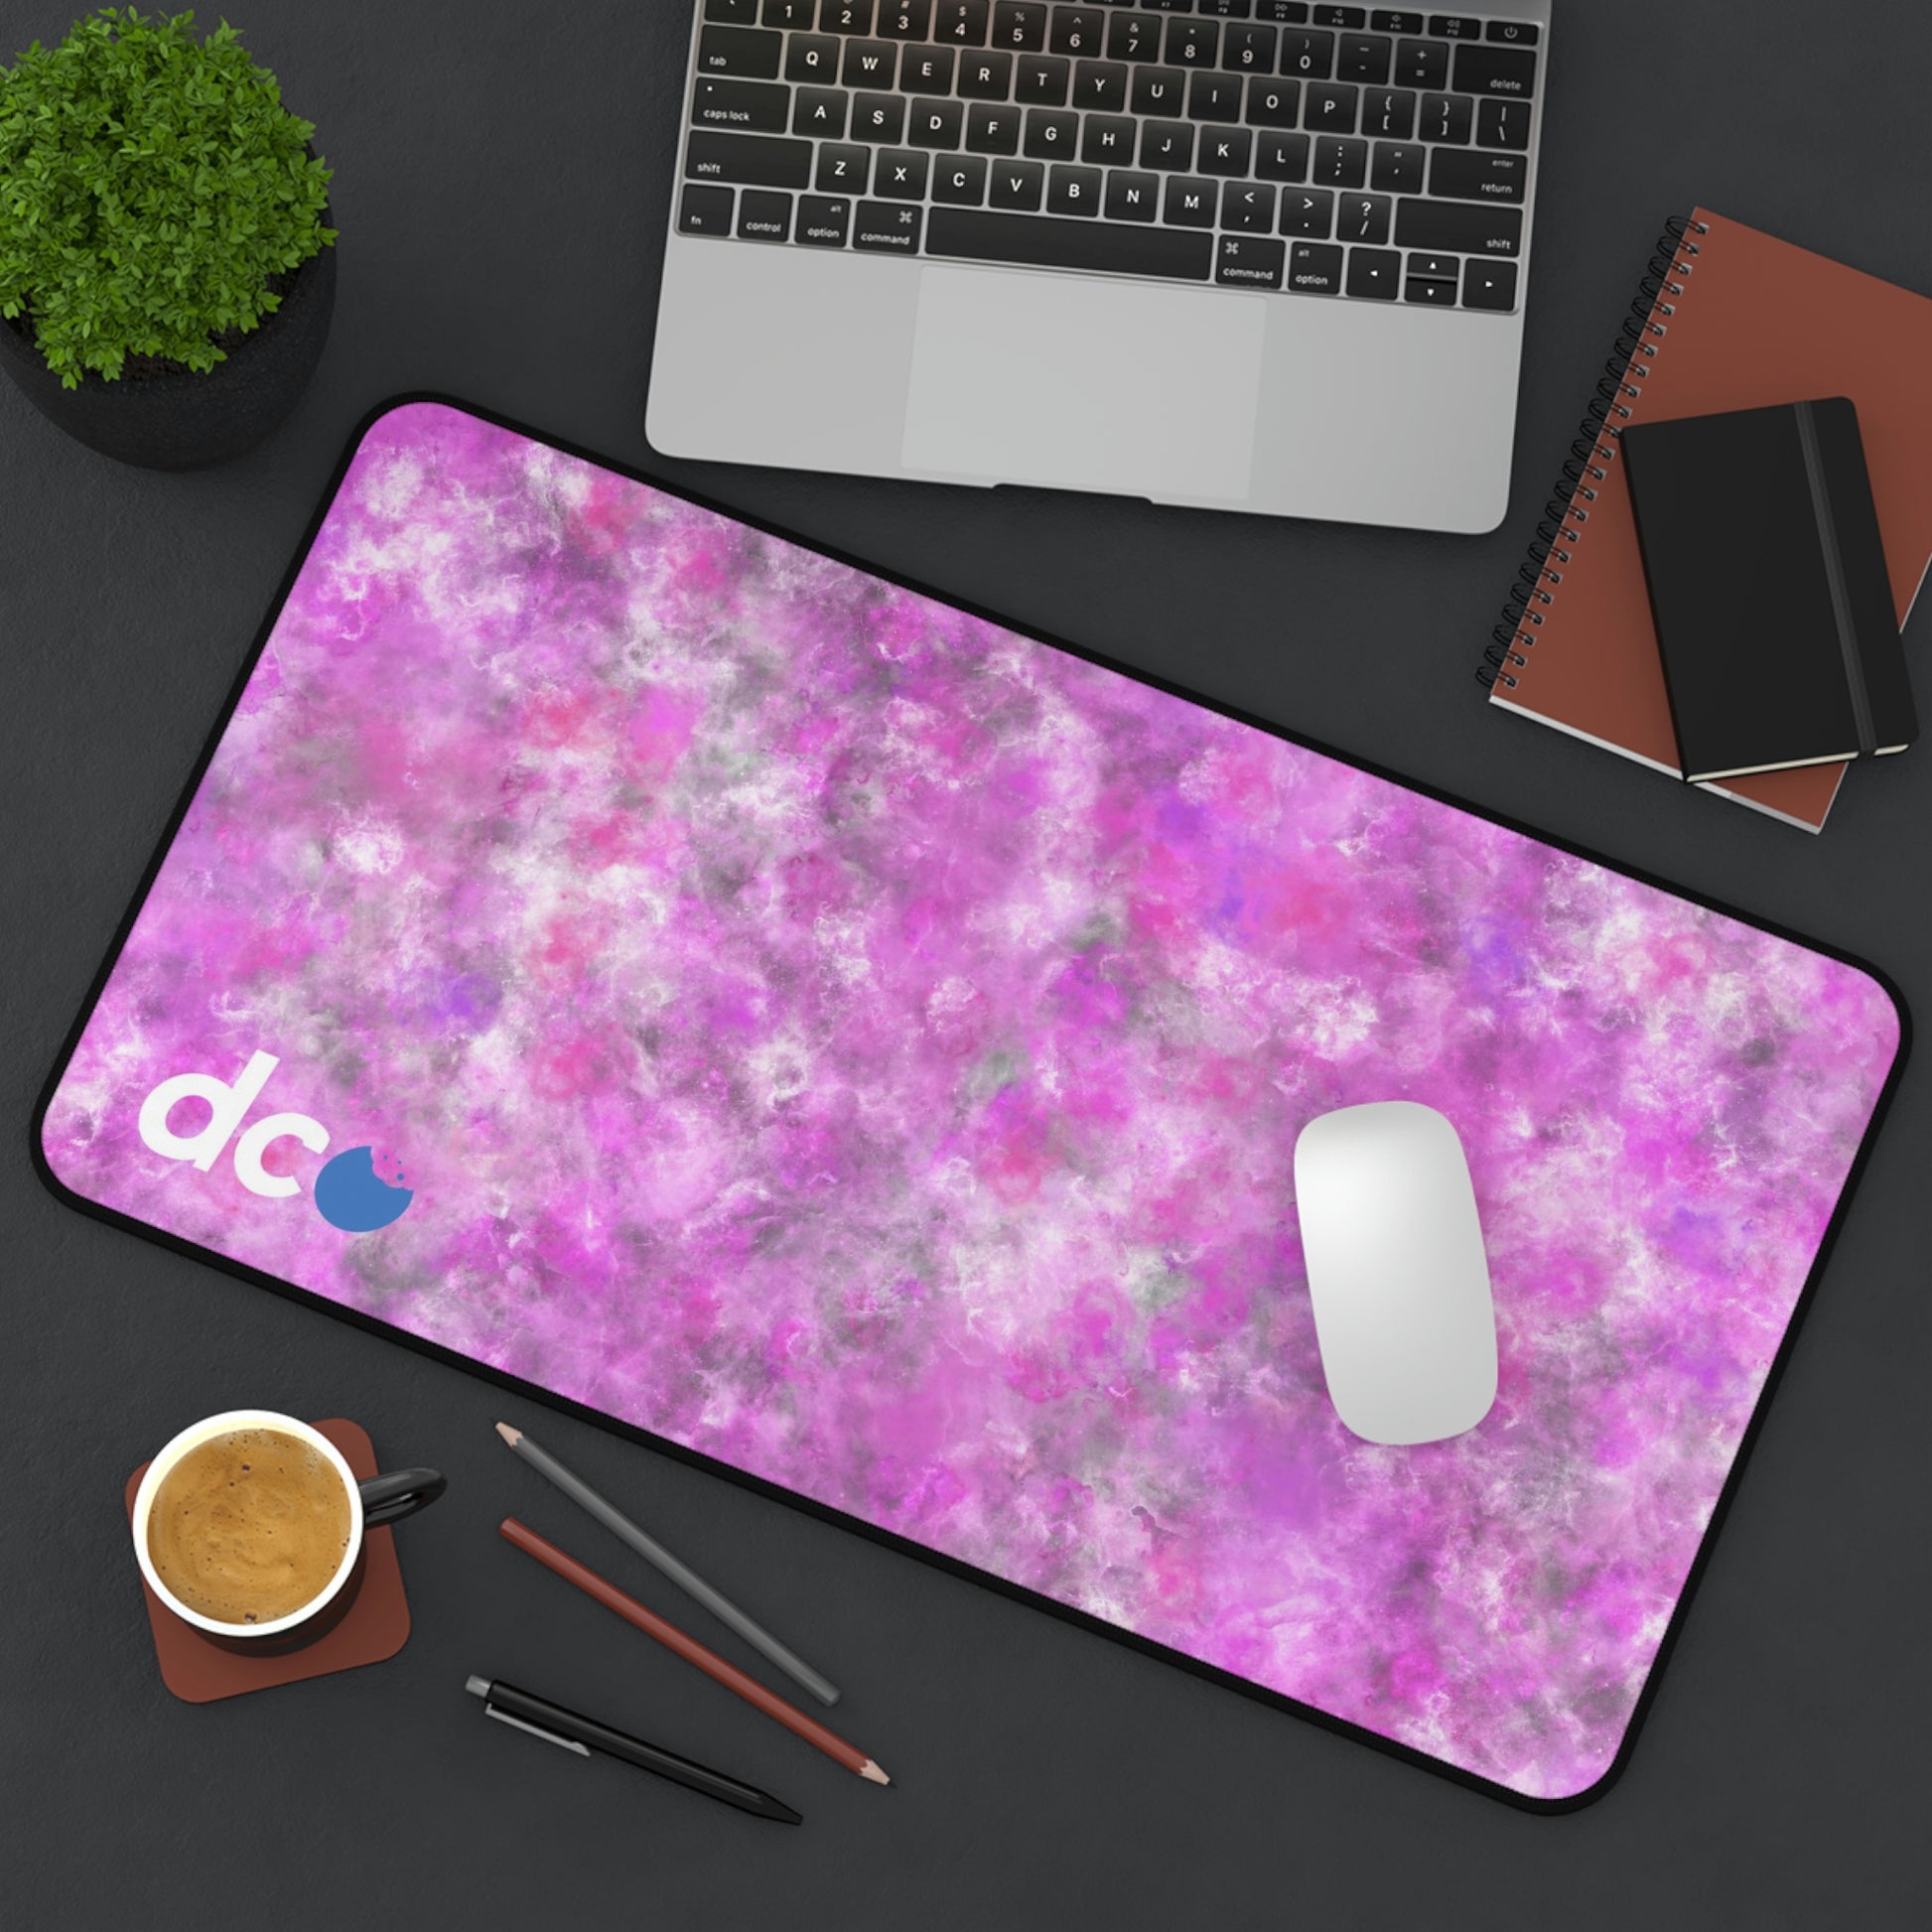 A 12" x 22" desk mat with a fluffy mix of pink, white, and gray sitting at an angle.